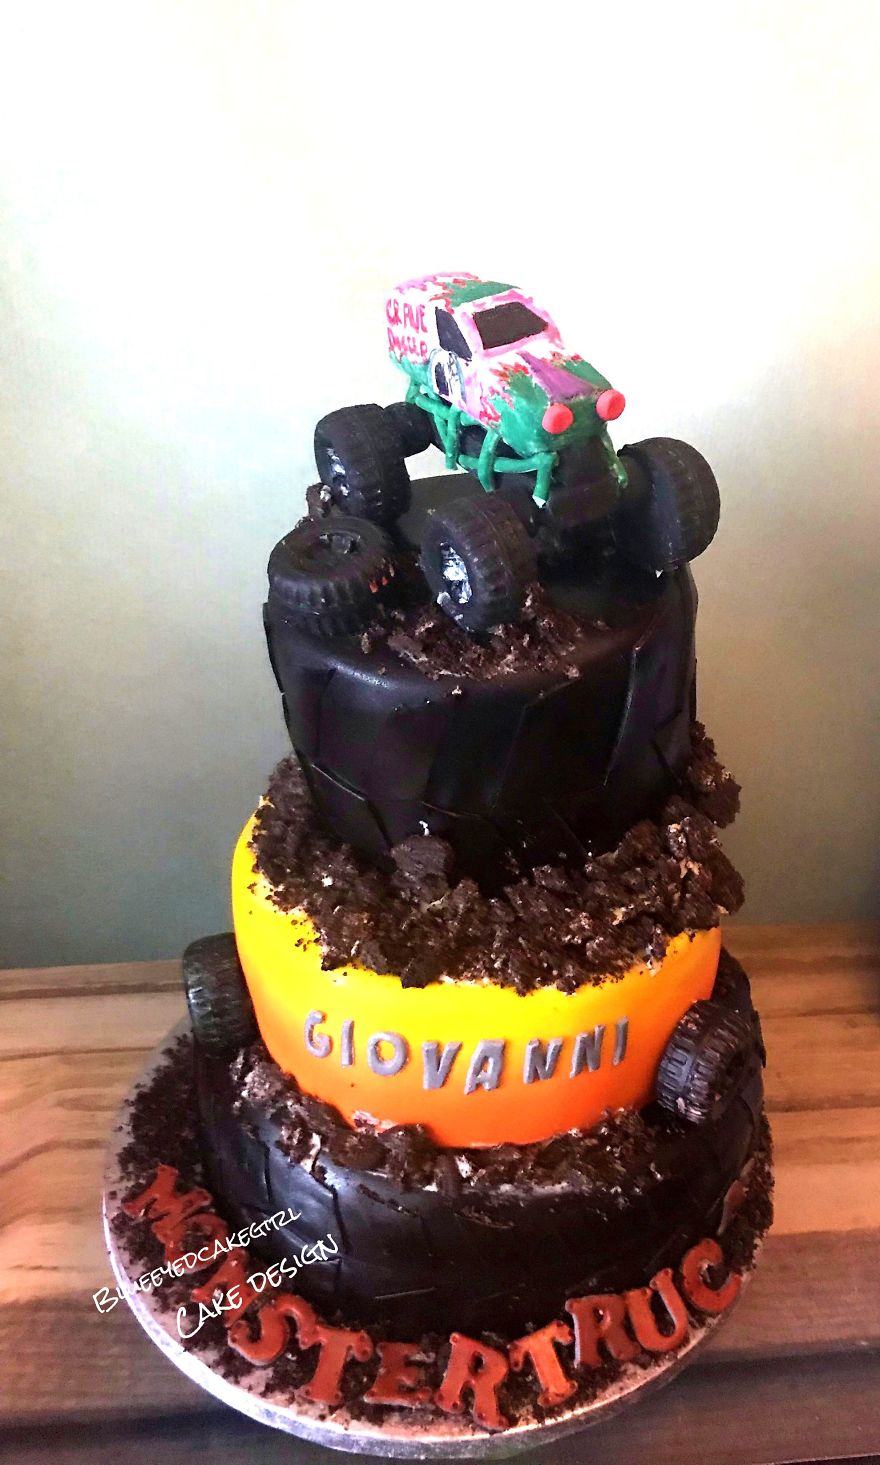 I Made A Monstertruck Cake For A 7 Year Old Boy. Totally Edible, The Truck Is Made Of Fondant And The "Dirt" Is Made Out Cookies.